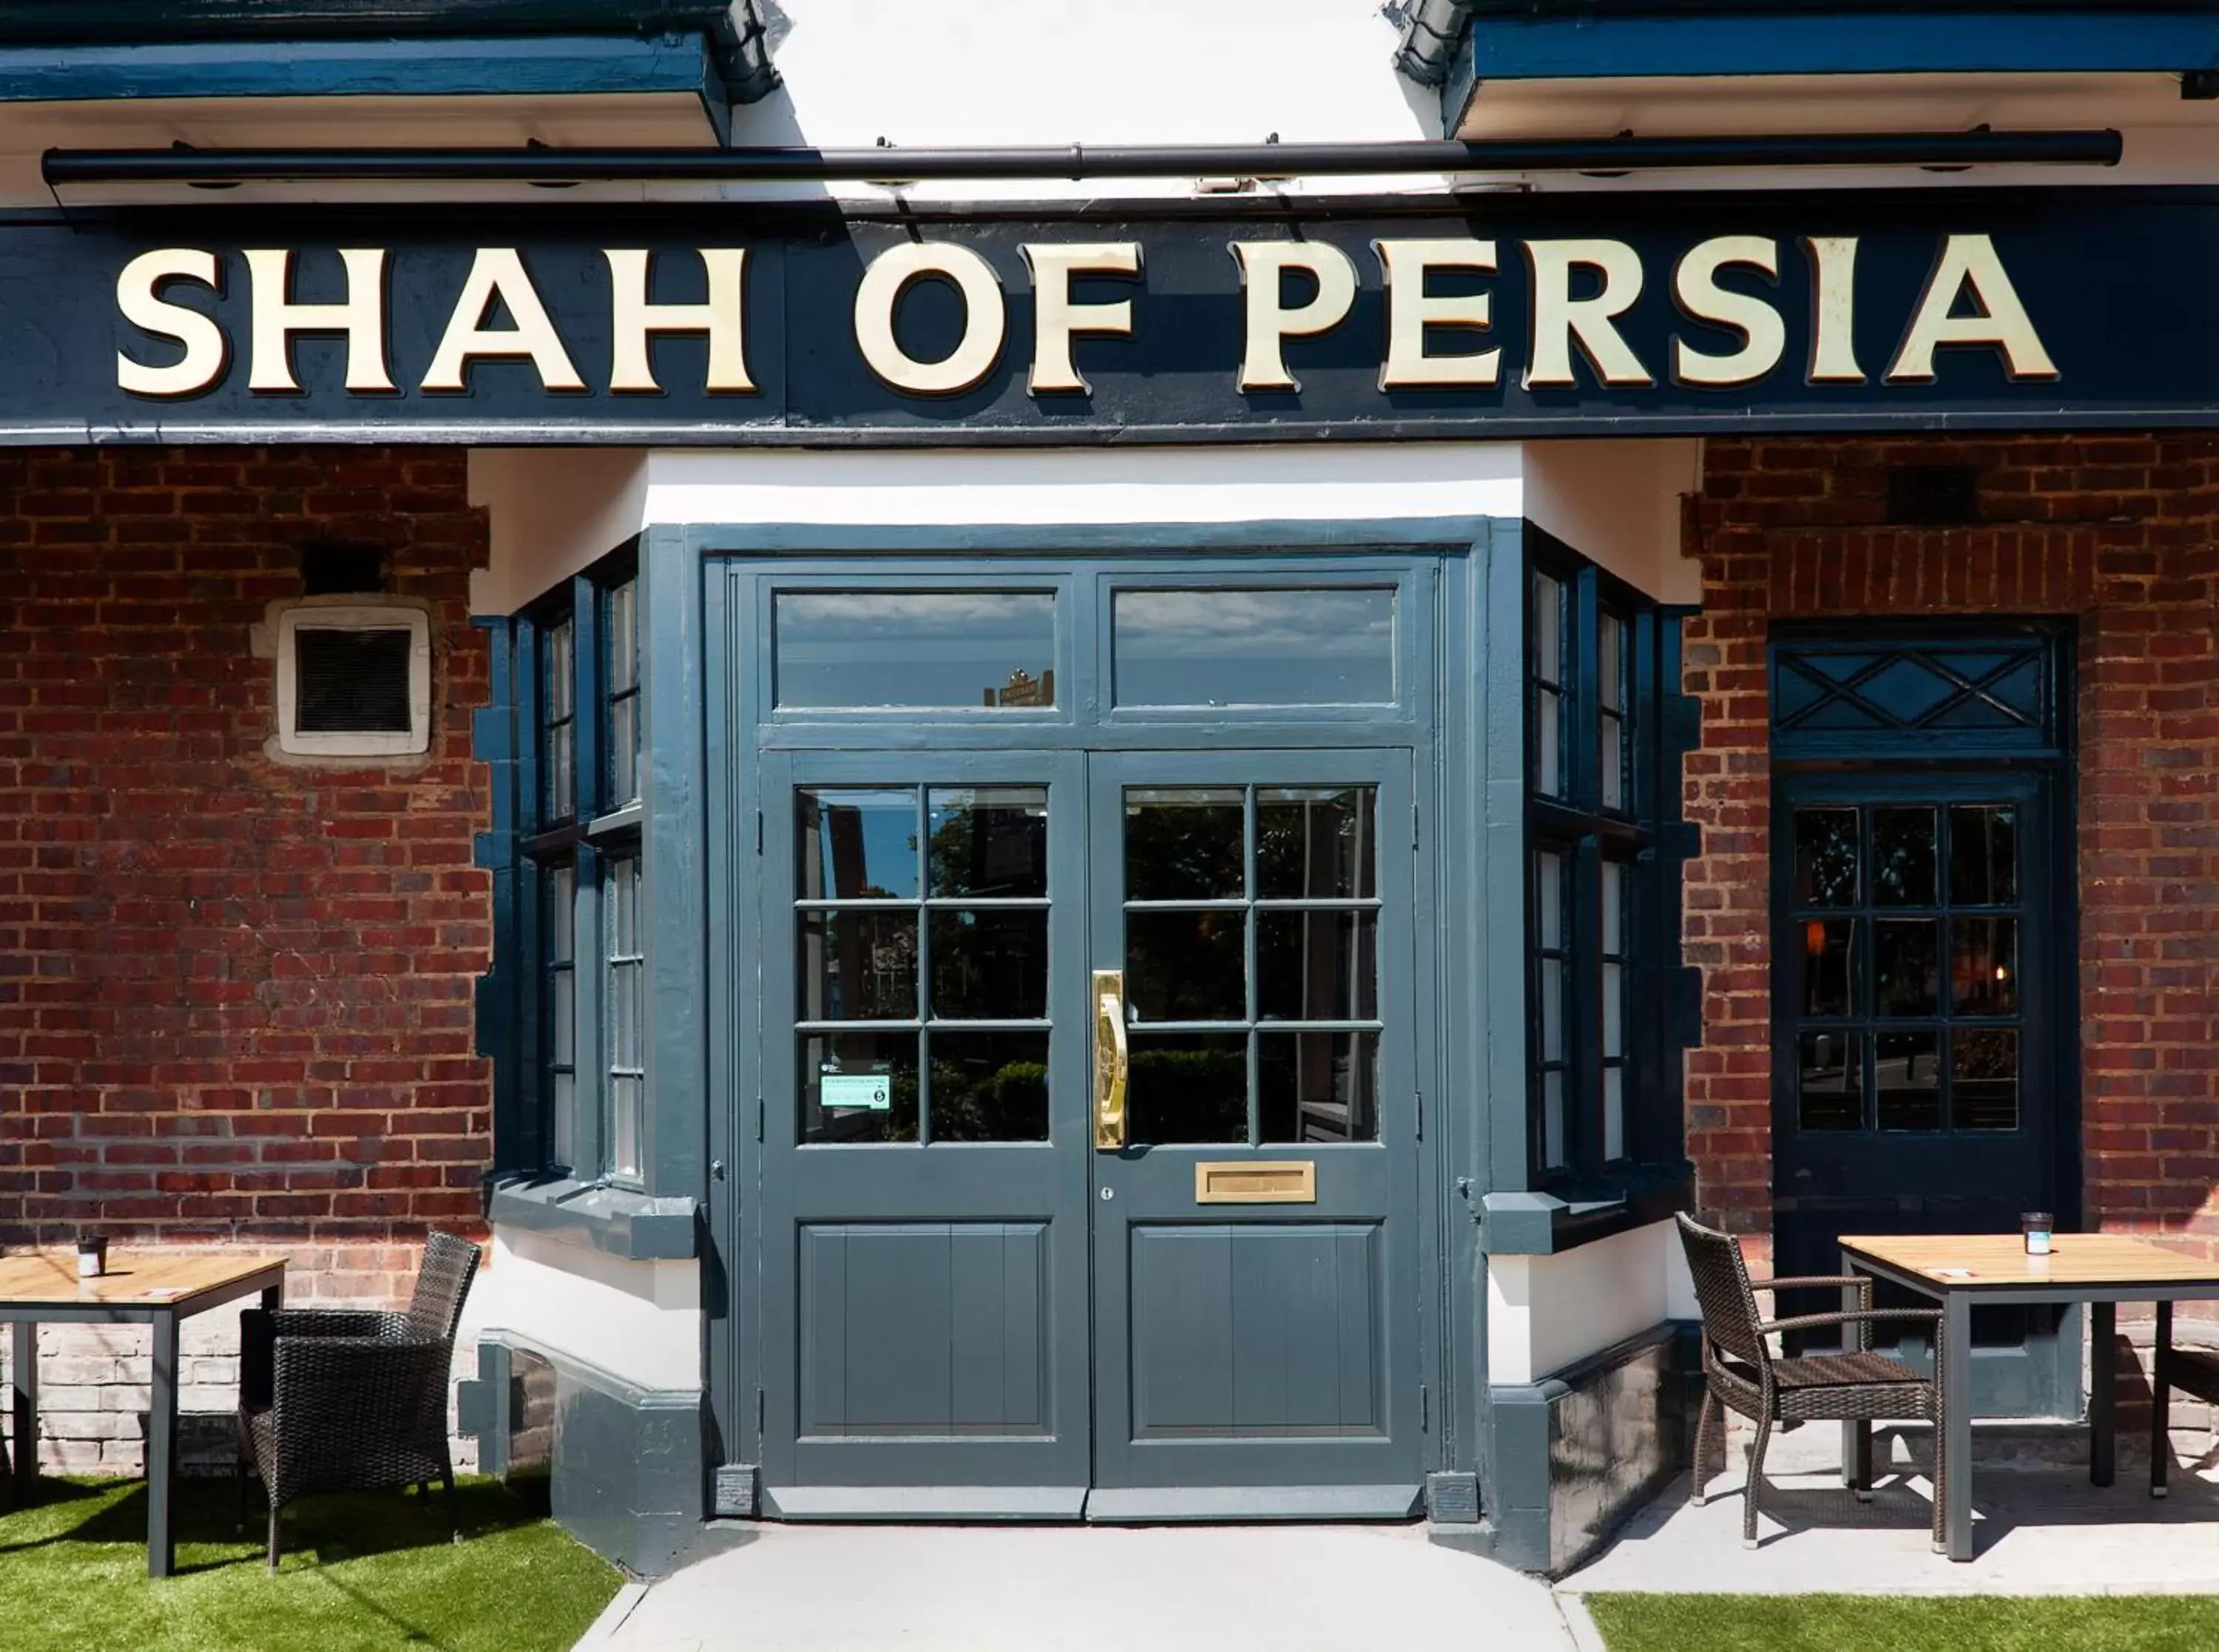 Facade/entrance in Shah of Persia, Poole by Marston's Inns